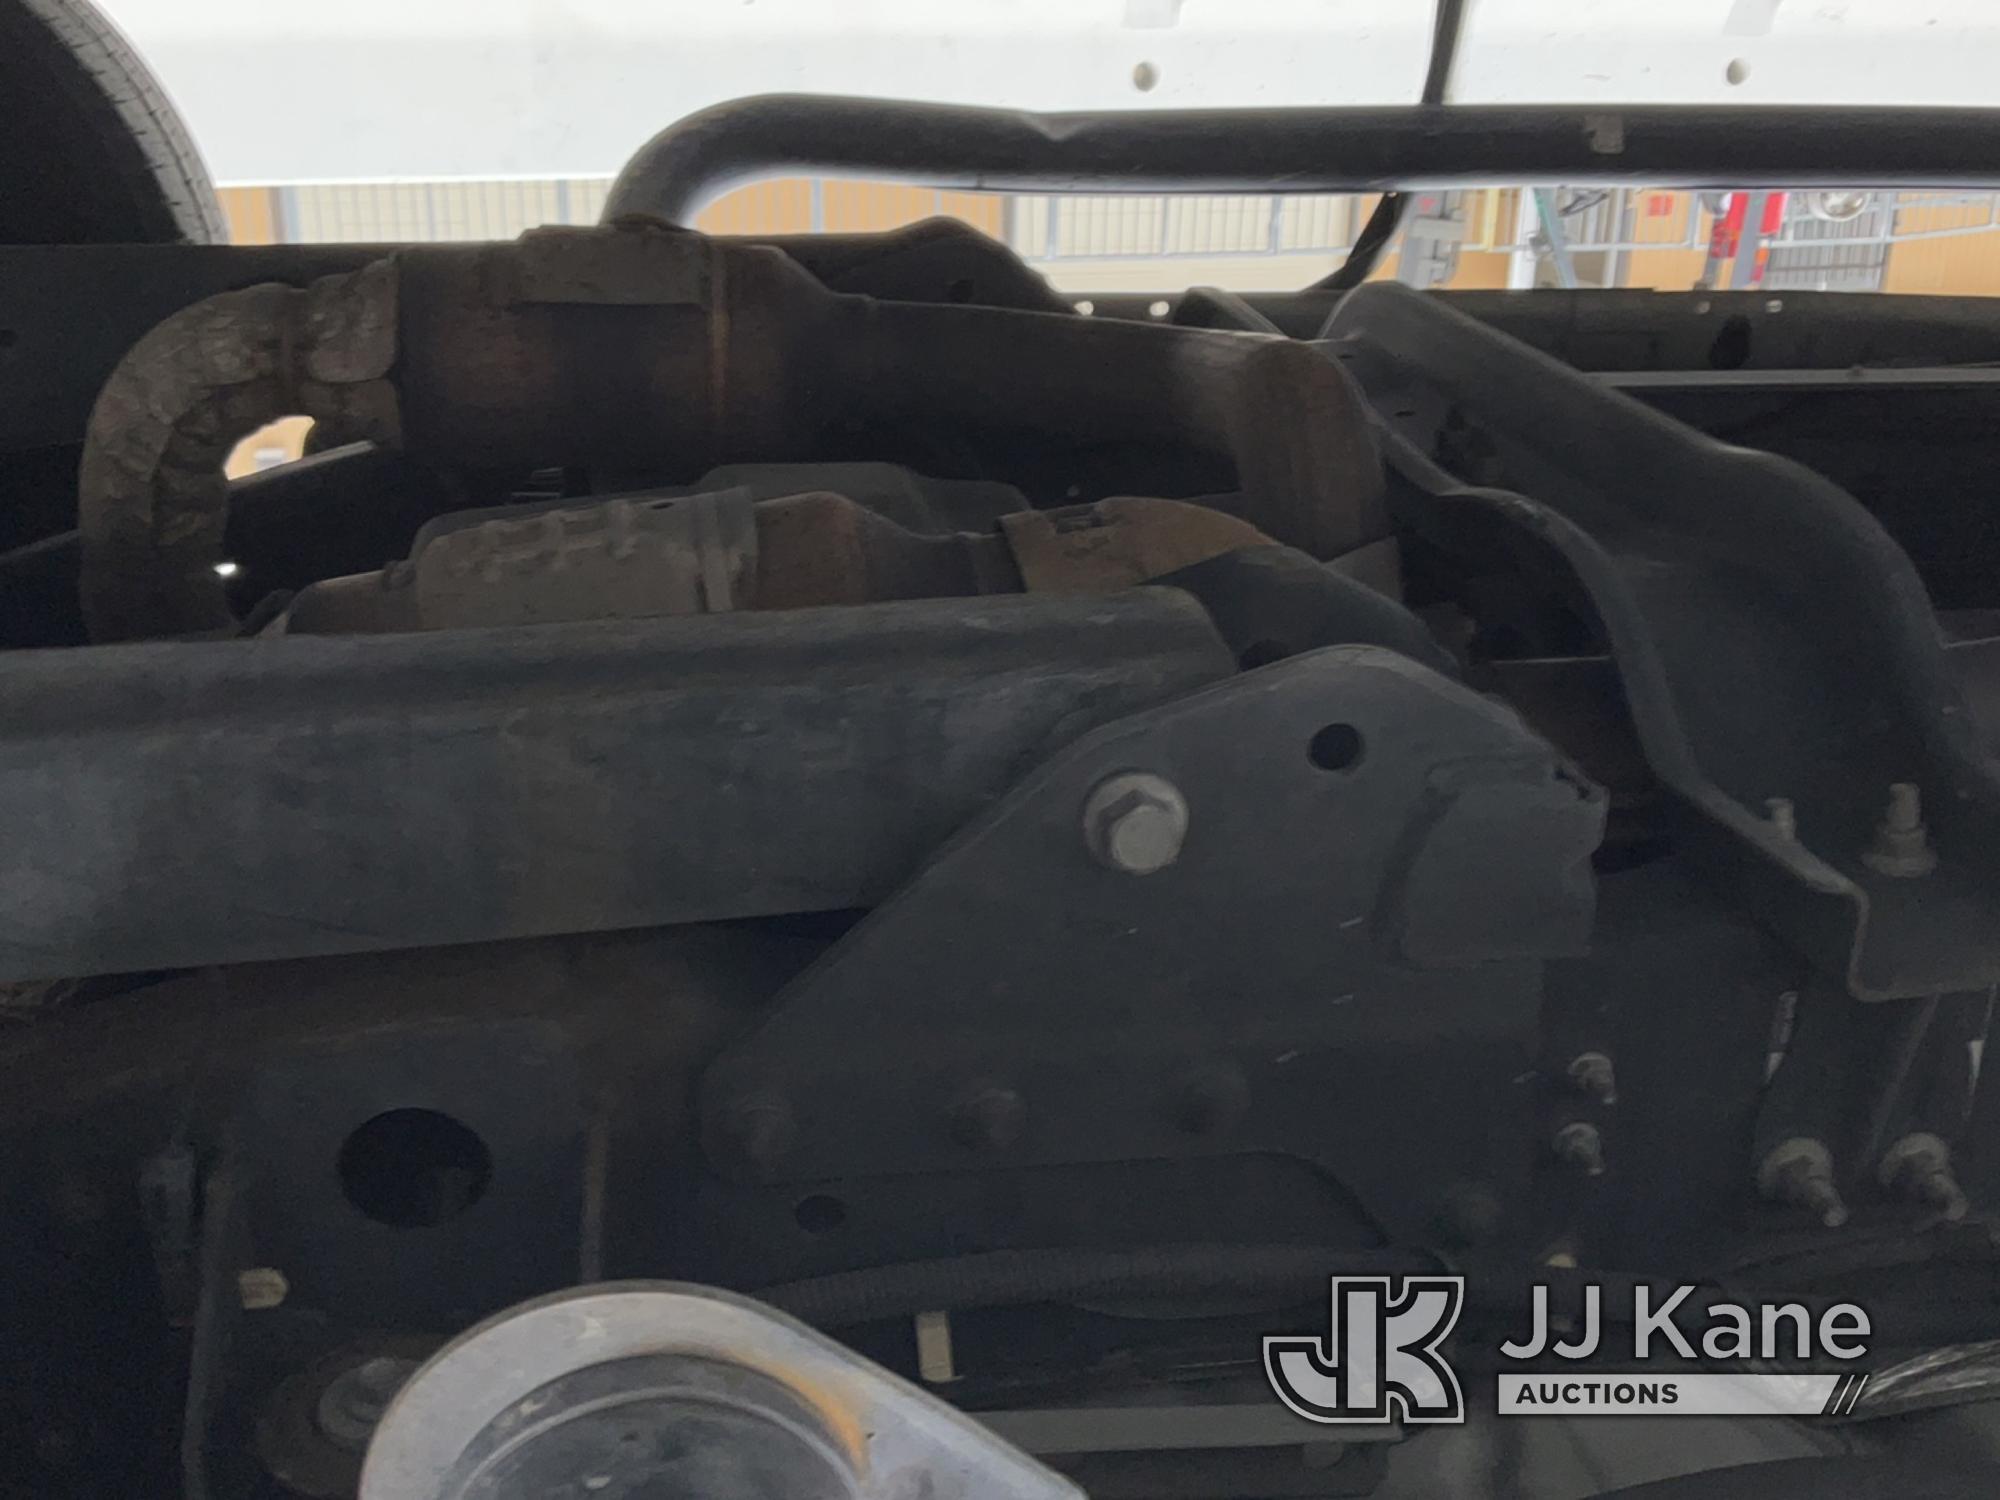 (Jurupa Valley, CA) 2011 Ford F250 Service Truck Runs & Moves, Paint Damage, Wrecked, Body Damage